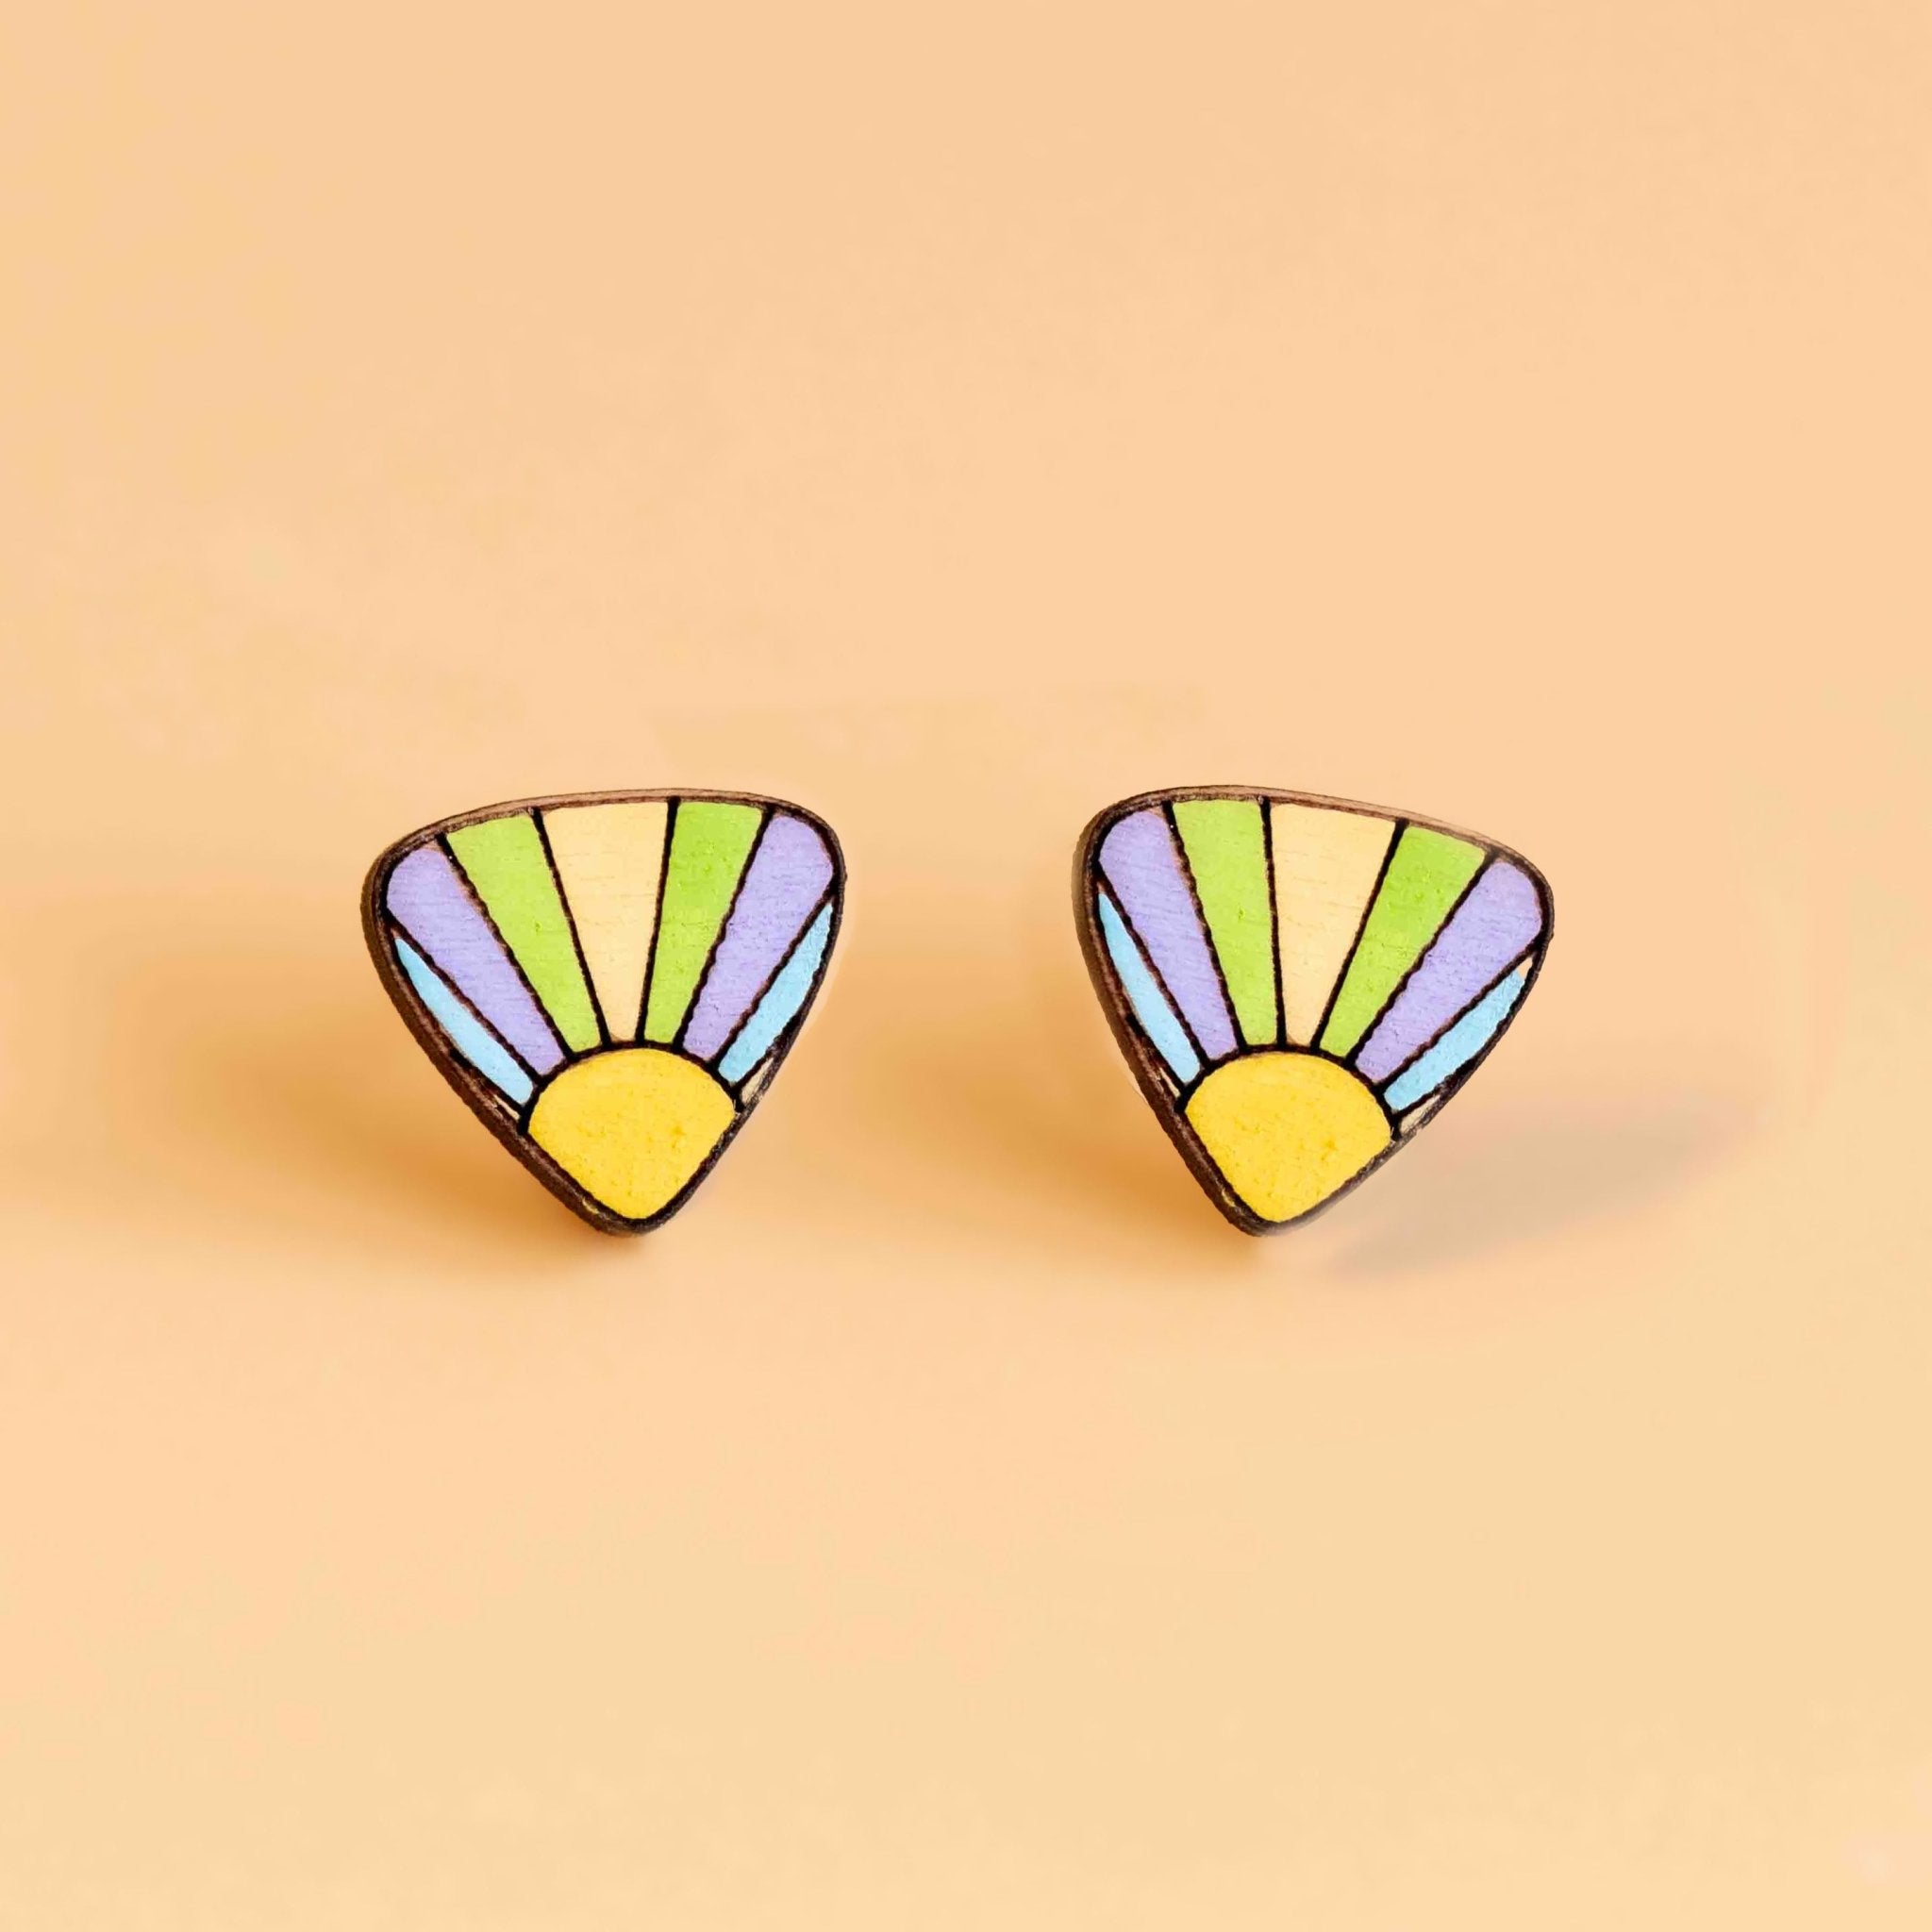 Hand-painted Sunshine Guitar Pick Earrings Wooden Jewellery - PET15187 - Robin Valley Official Store